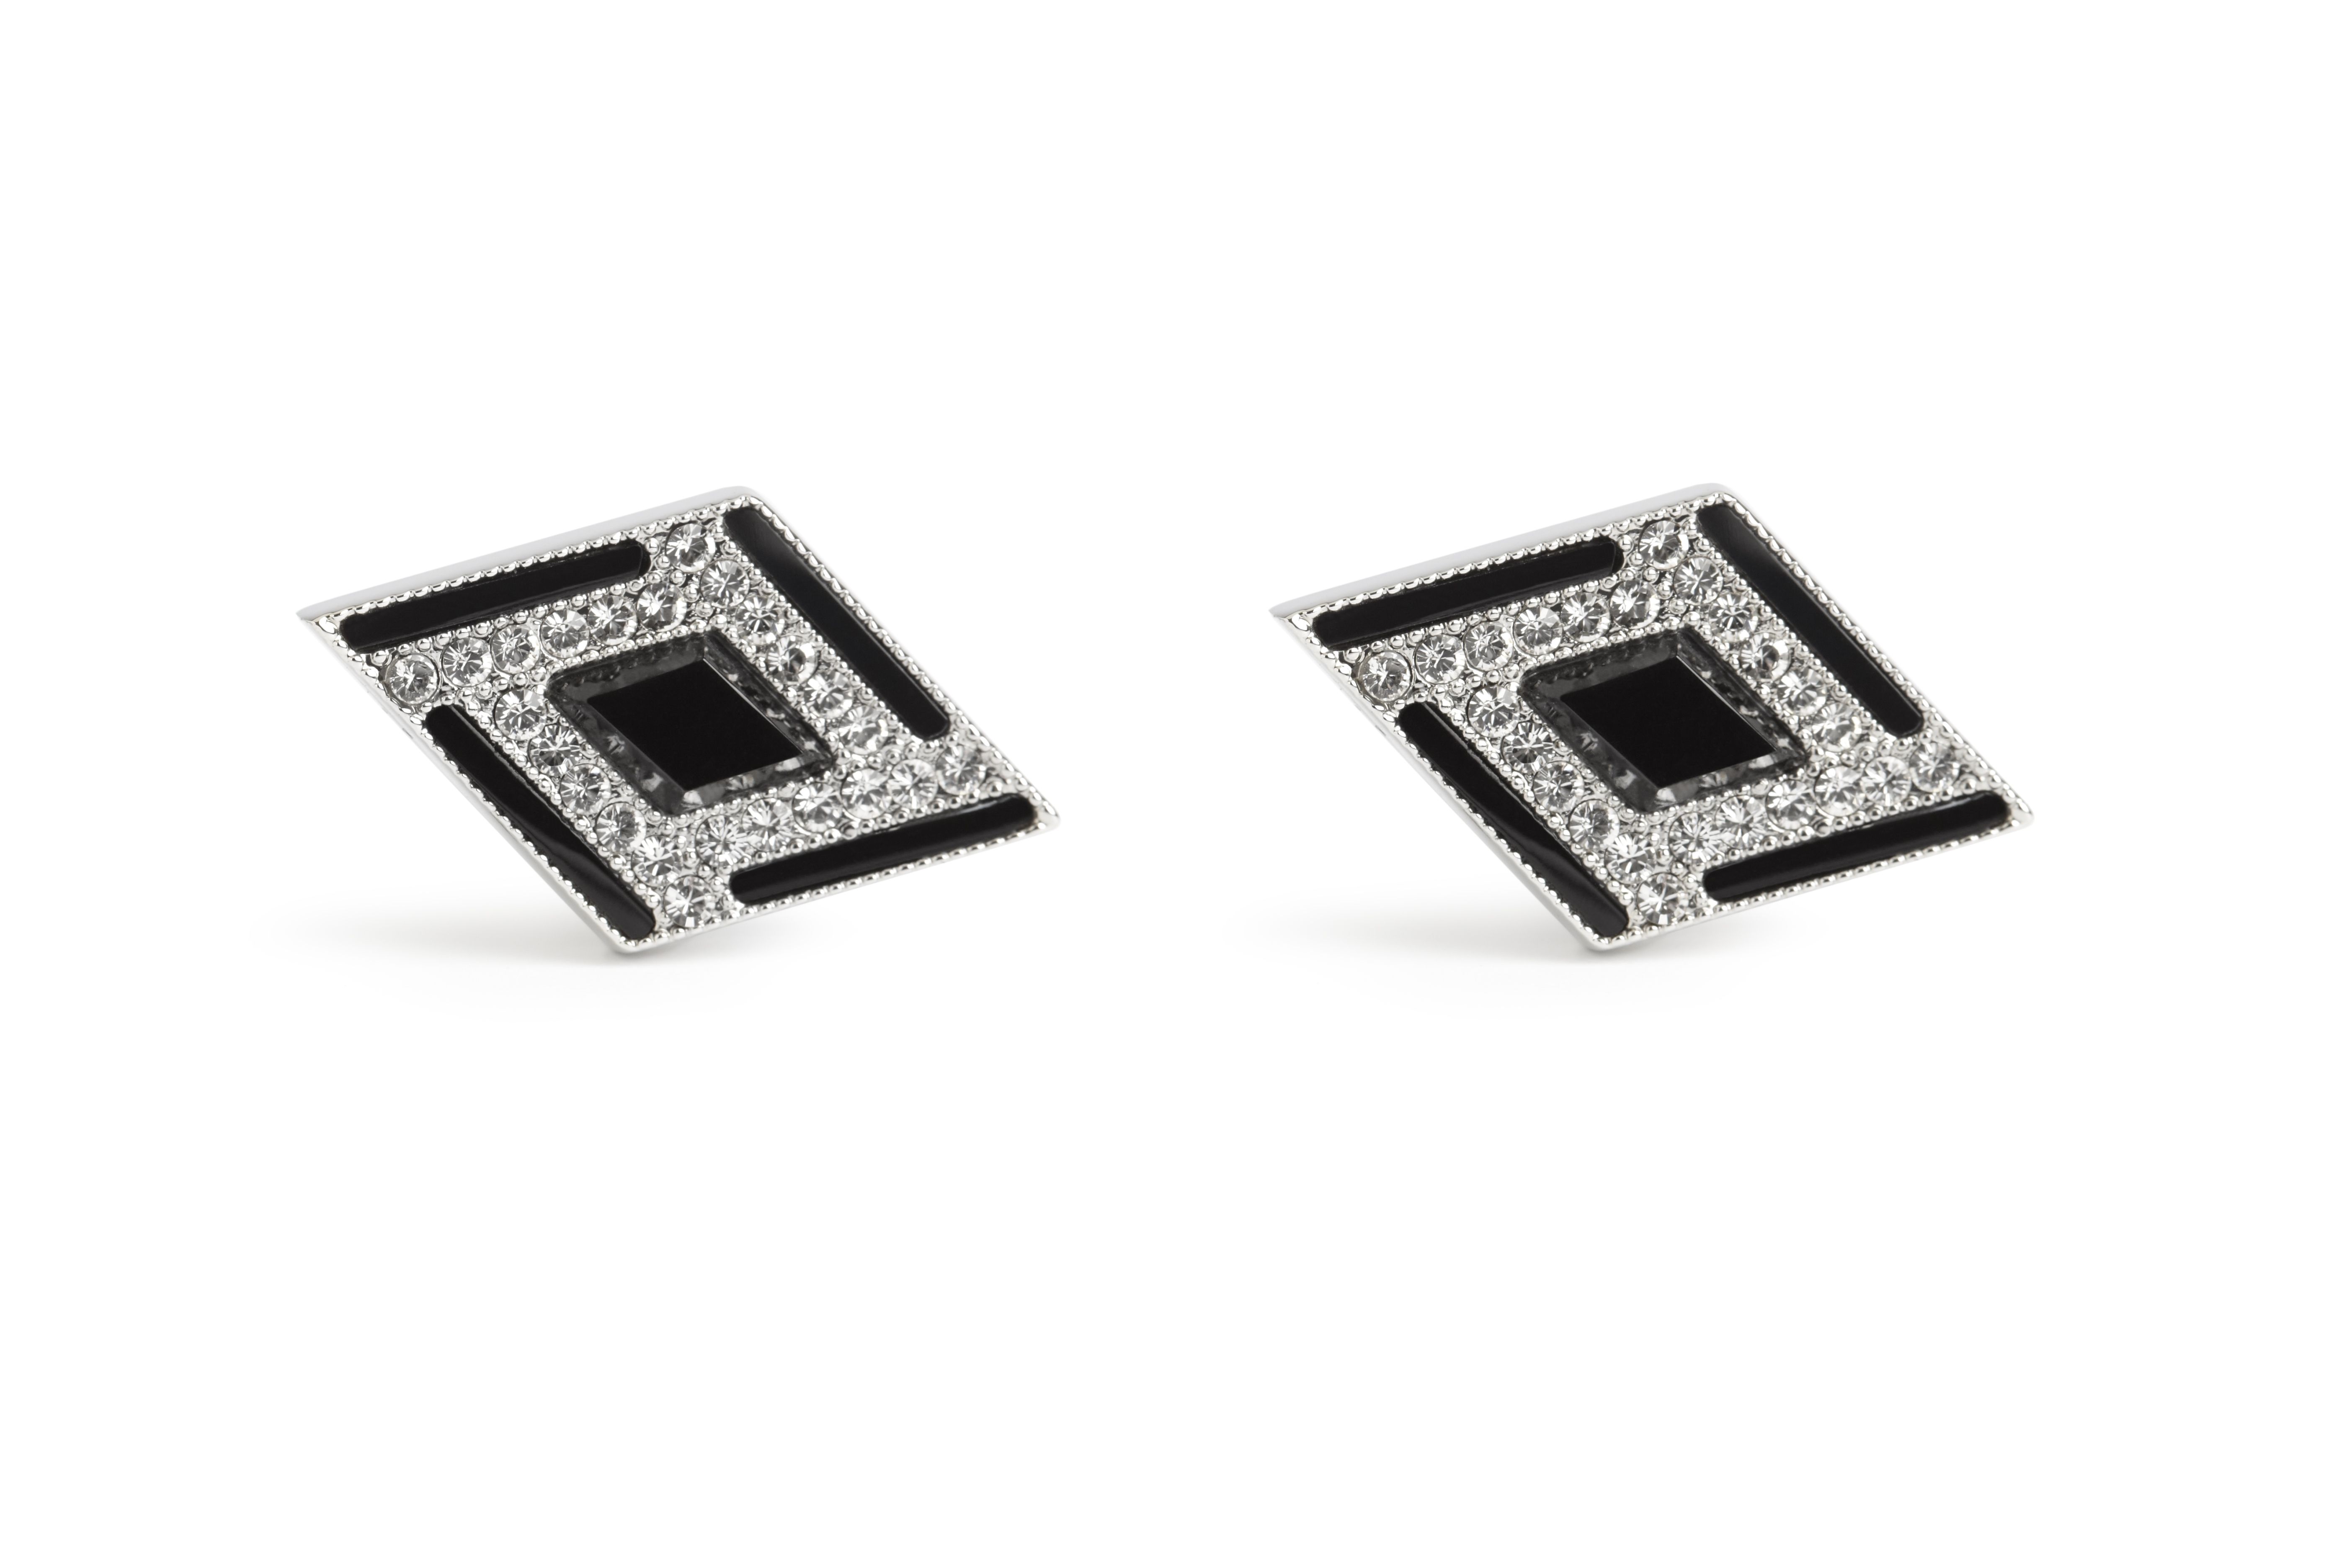 Add a flash of eye catching sparkle to your cuff with this art deco inspired cufflink.  Pure Simon Carter - understated, inspired.  A charming composition of onyx stones hand set with Swarovski crystals all delivered with our renowned attention to detail